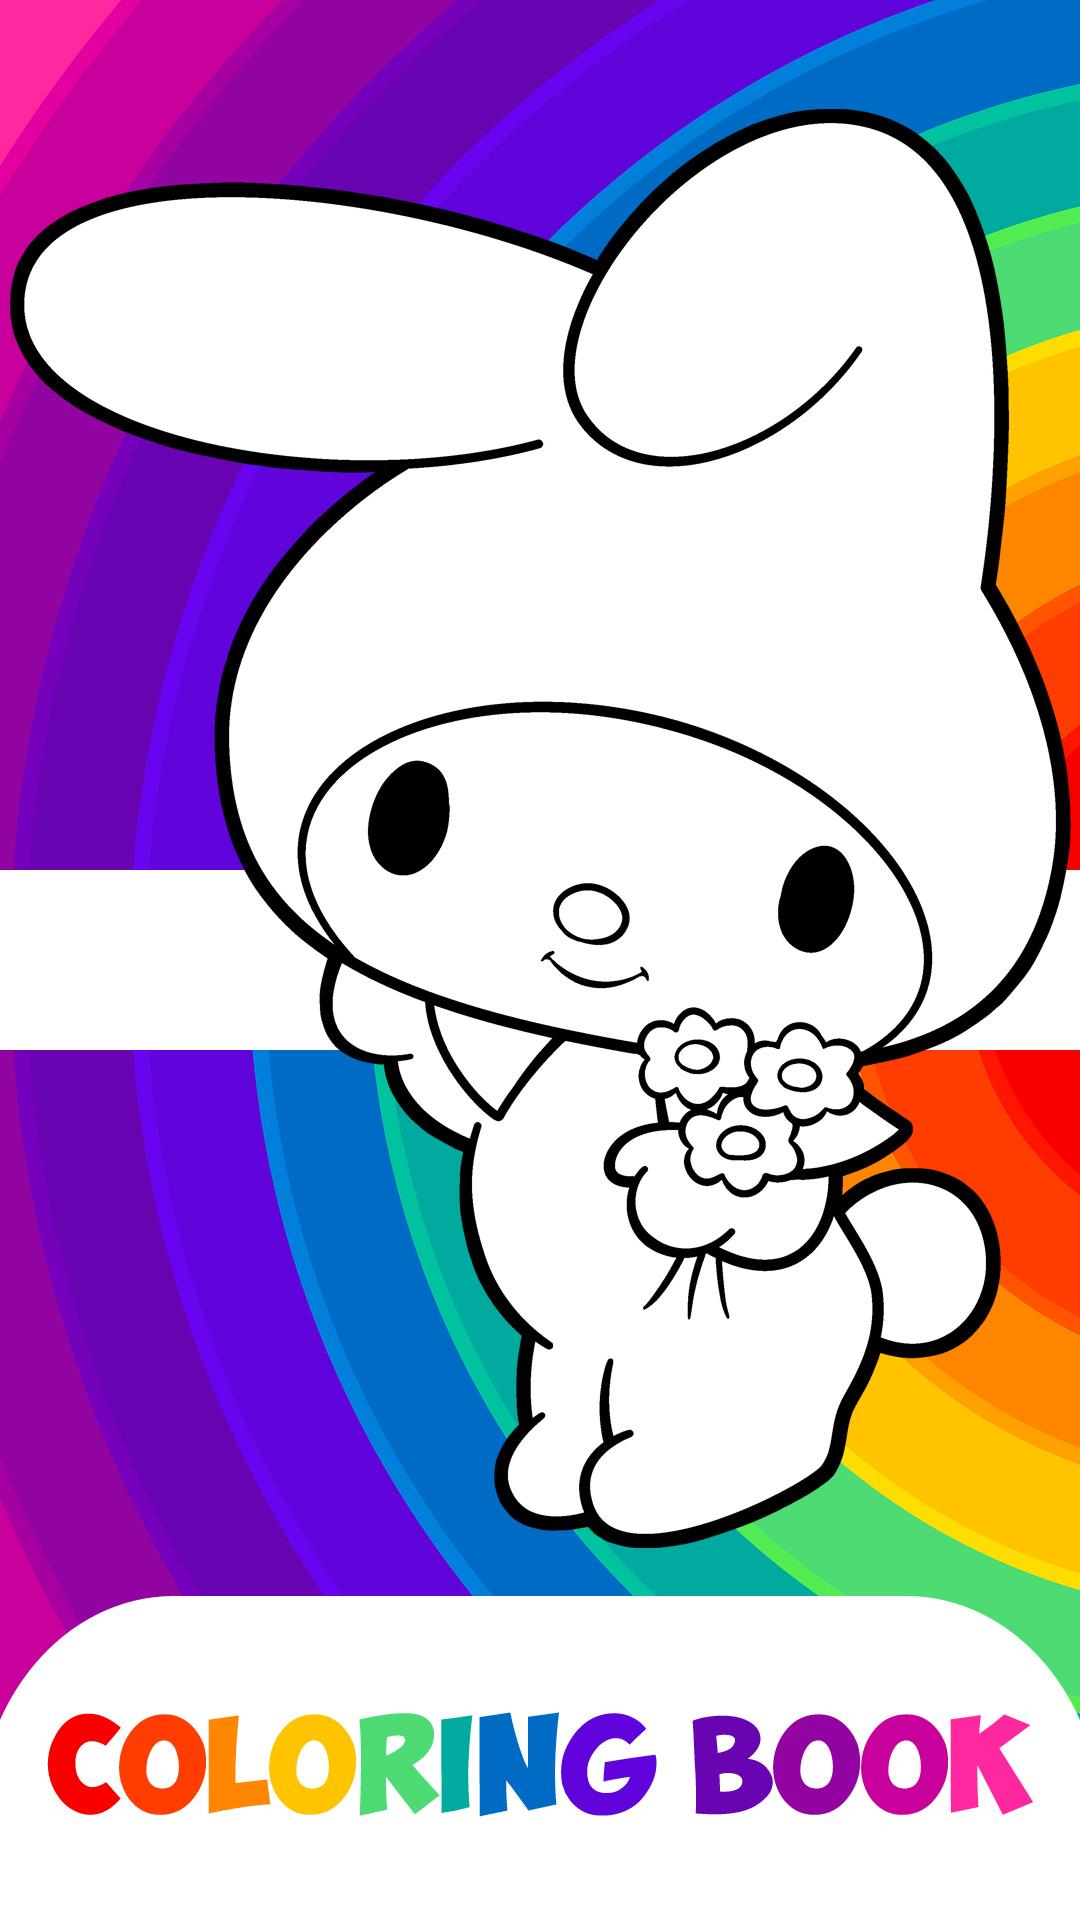 Download Sanrio Coloring Book android on PC